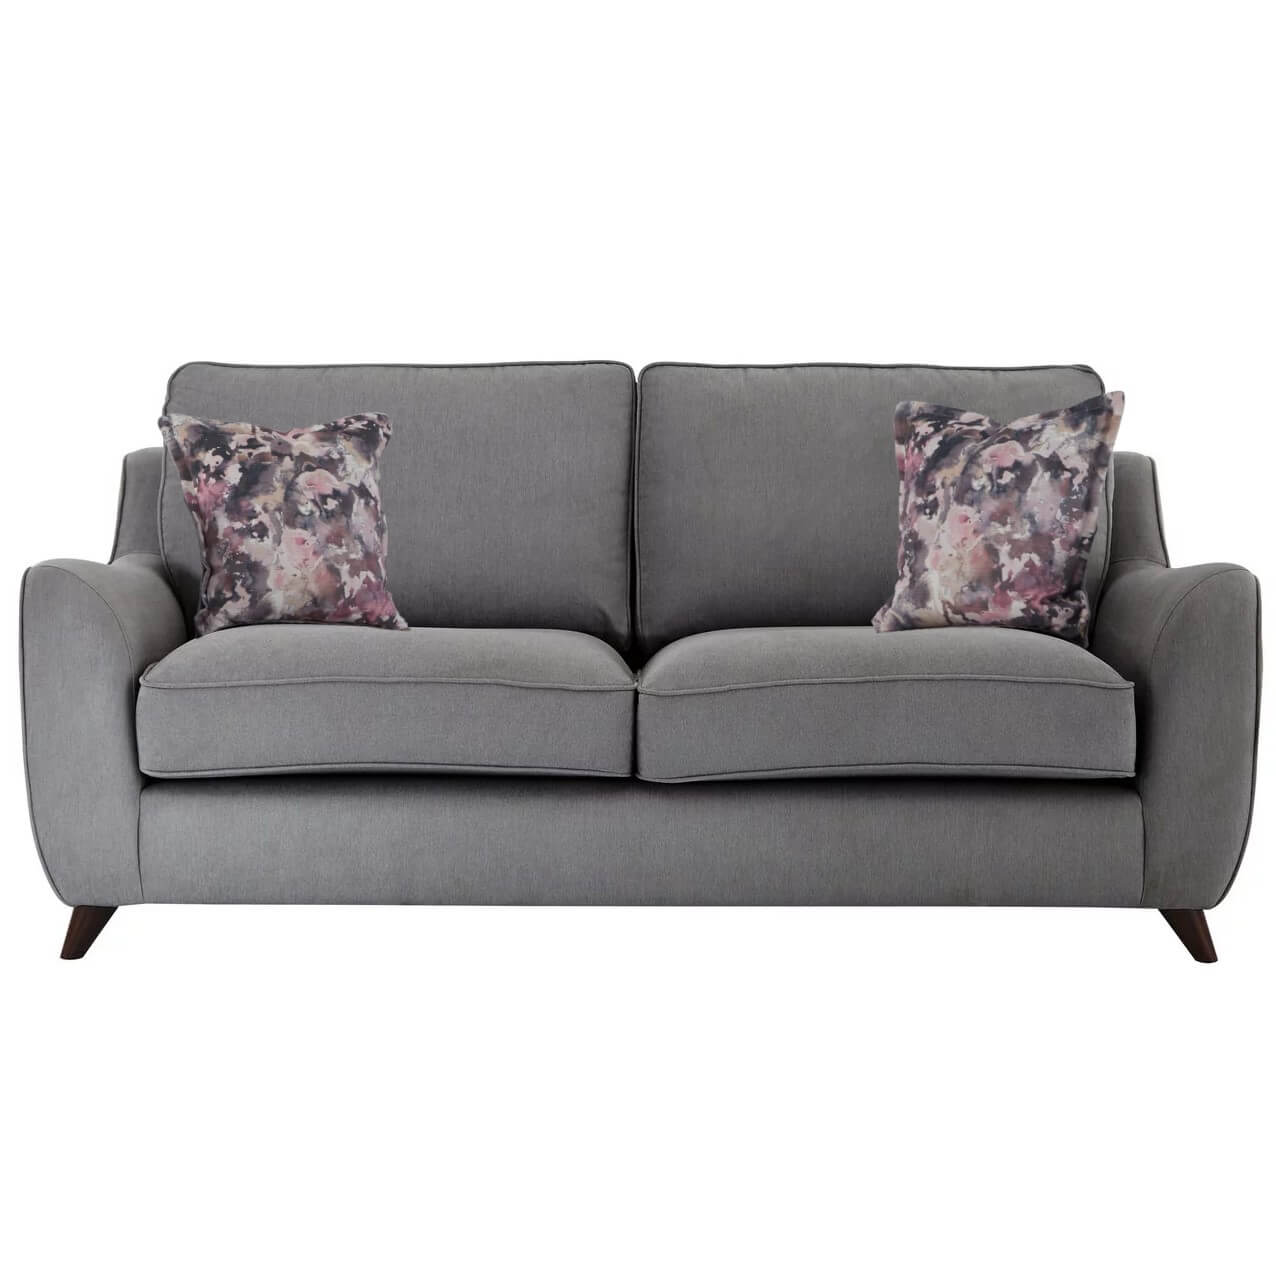 Showing image for Cavalli 2-seater sofa